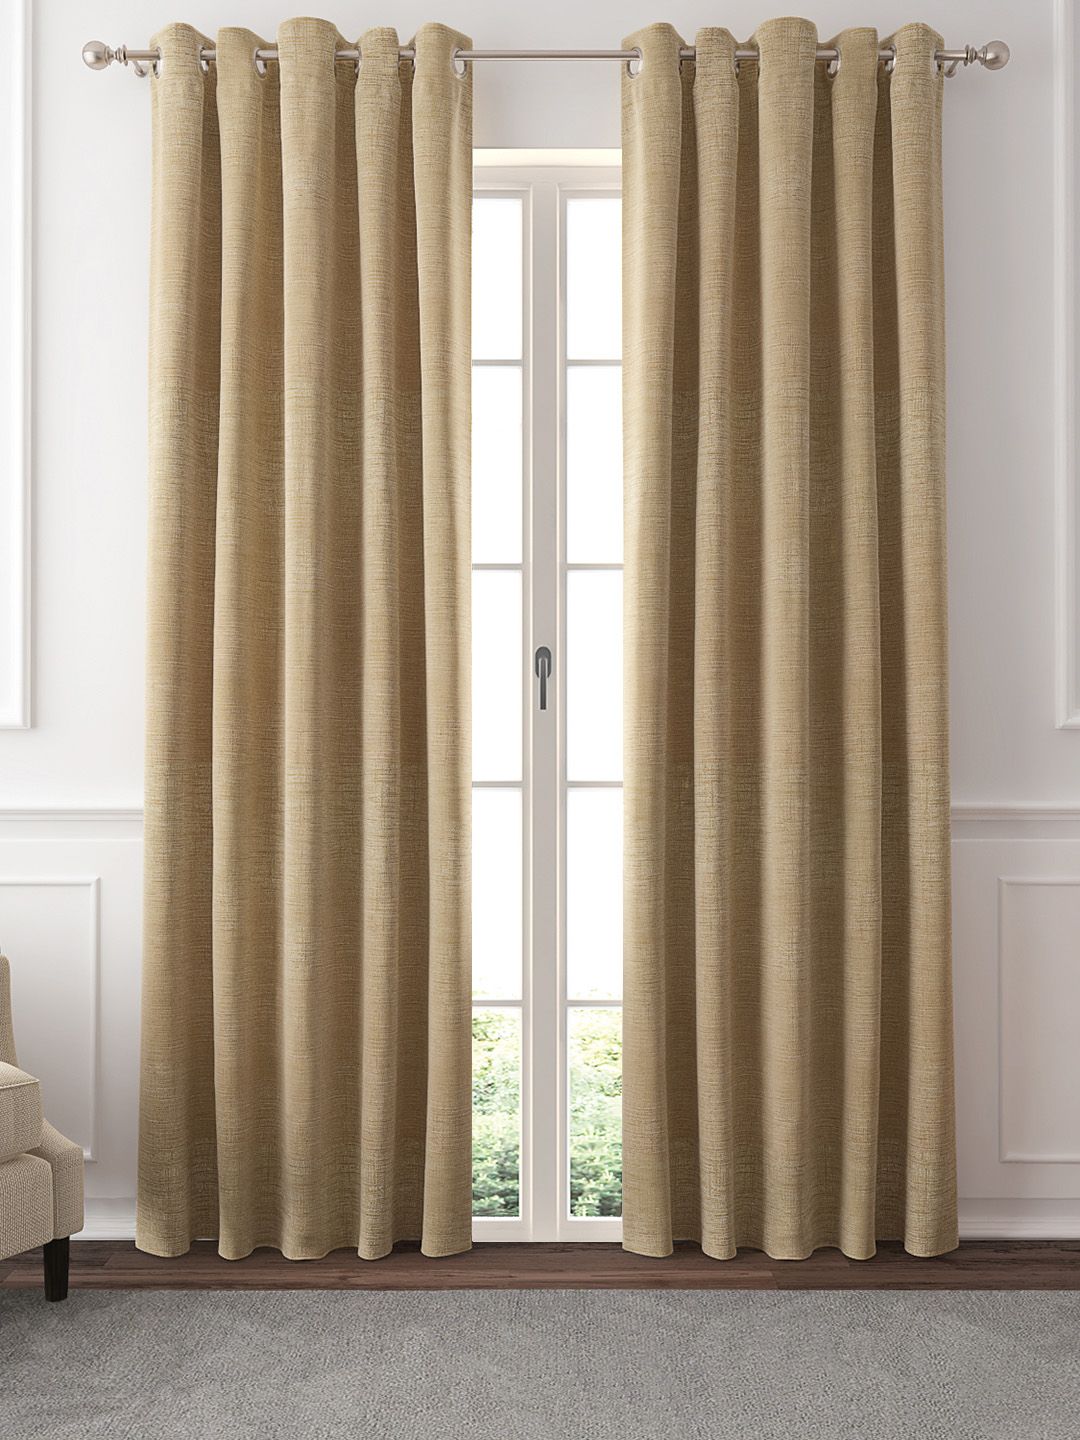 GM Set of 2 Beige Solid Black Out Door Curtains Price in India